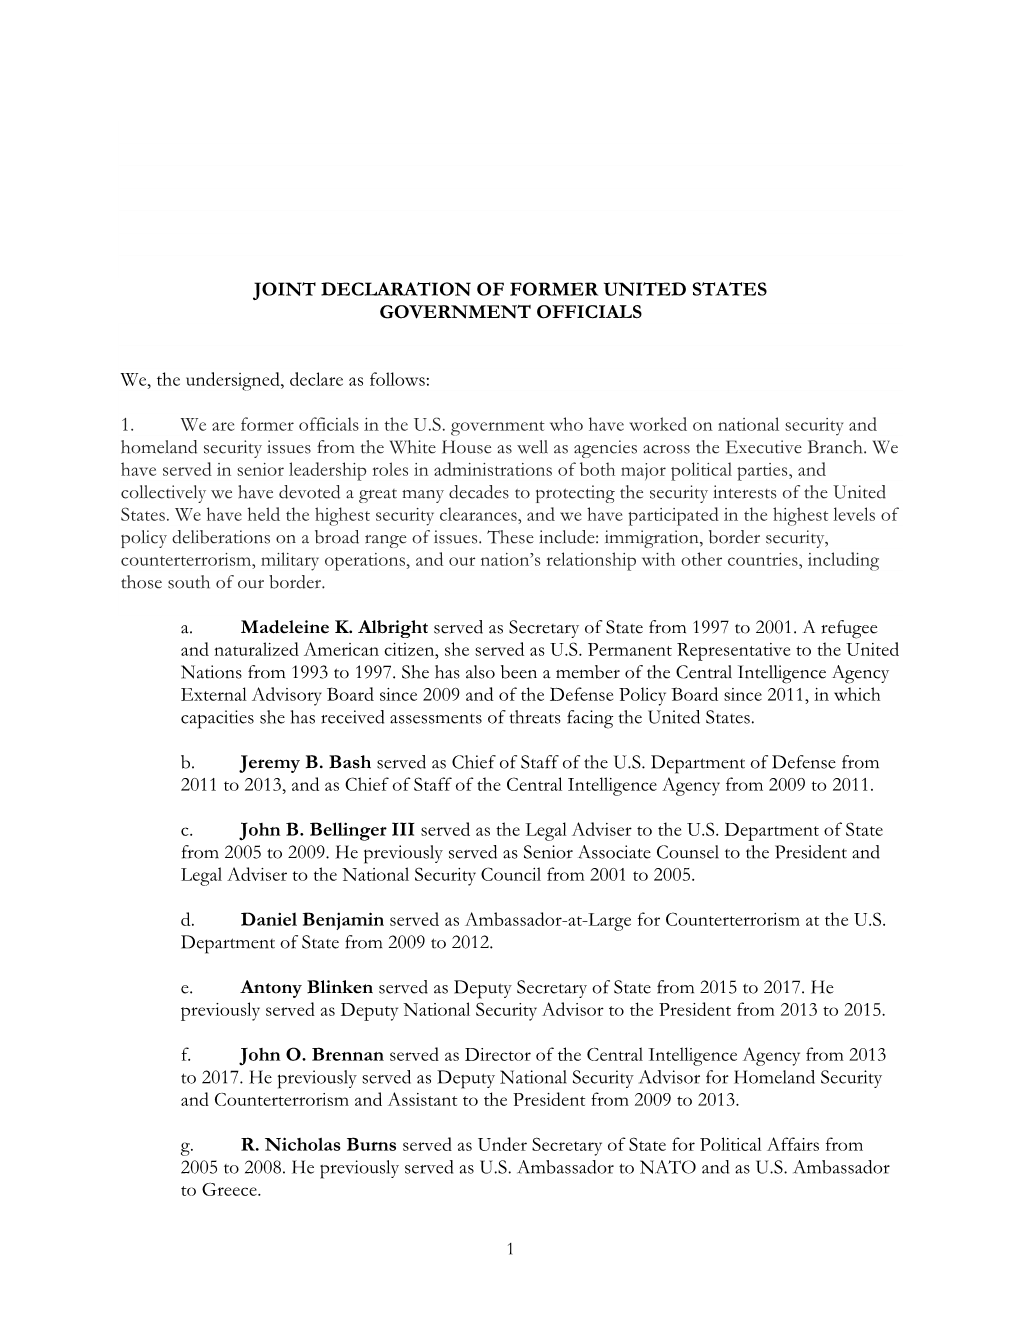 Joint Declaration of Former United States Government Officials